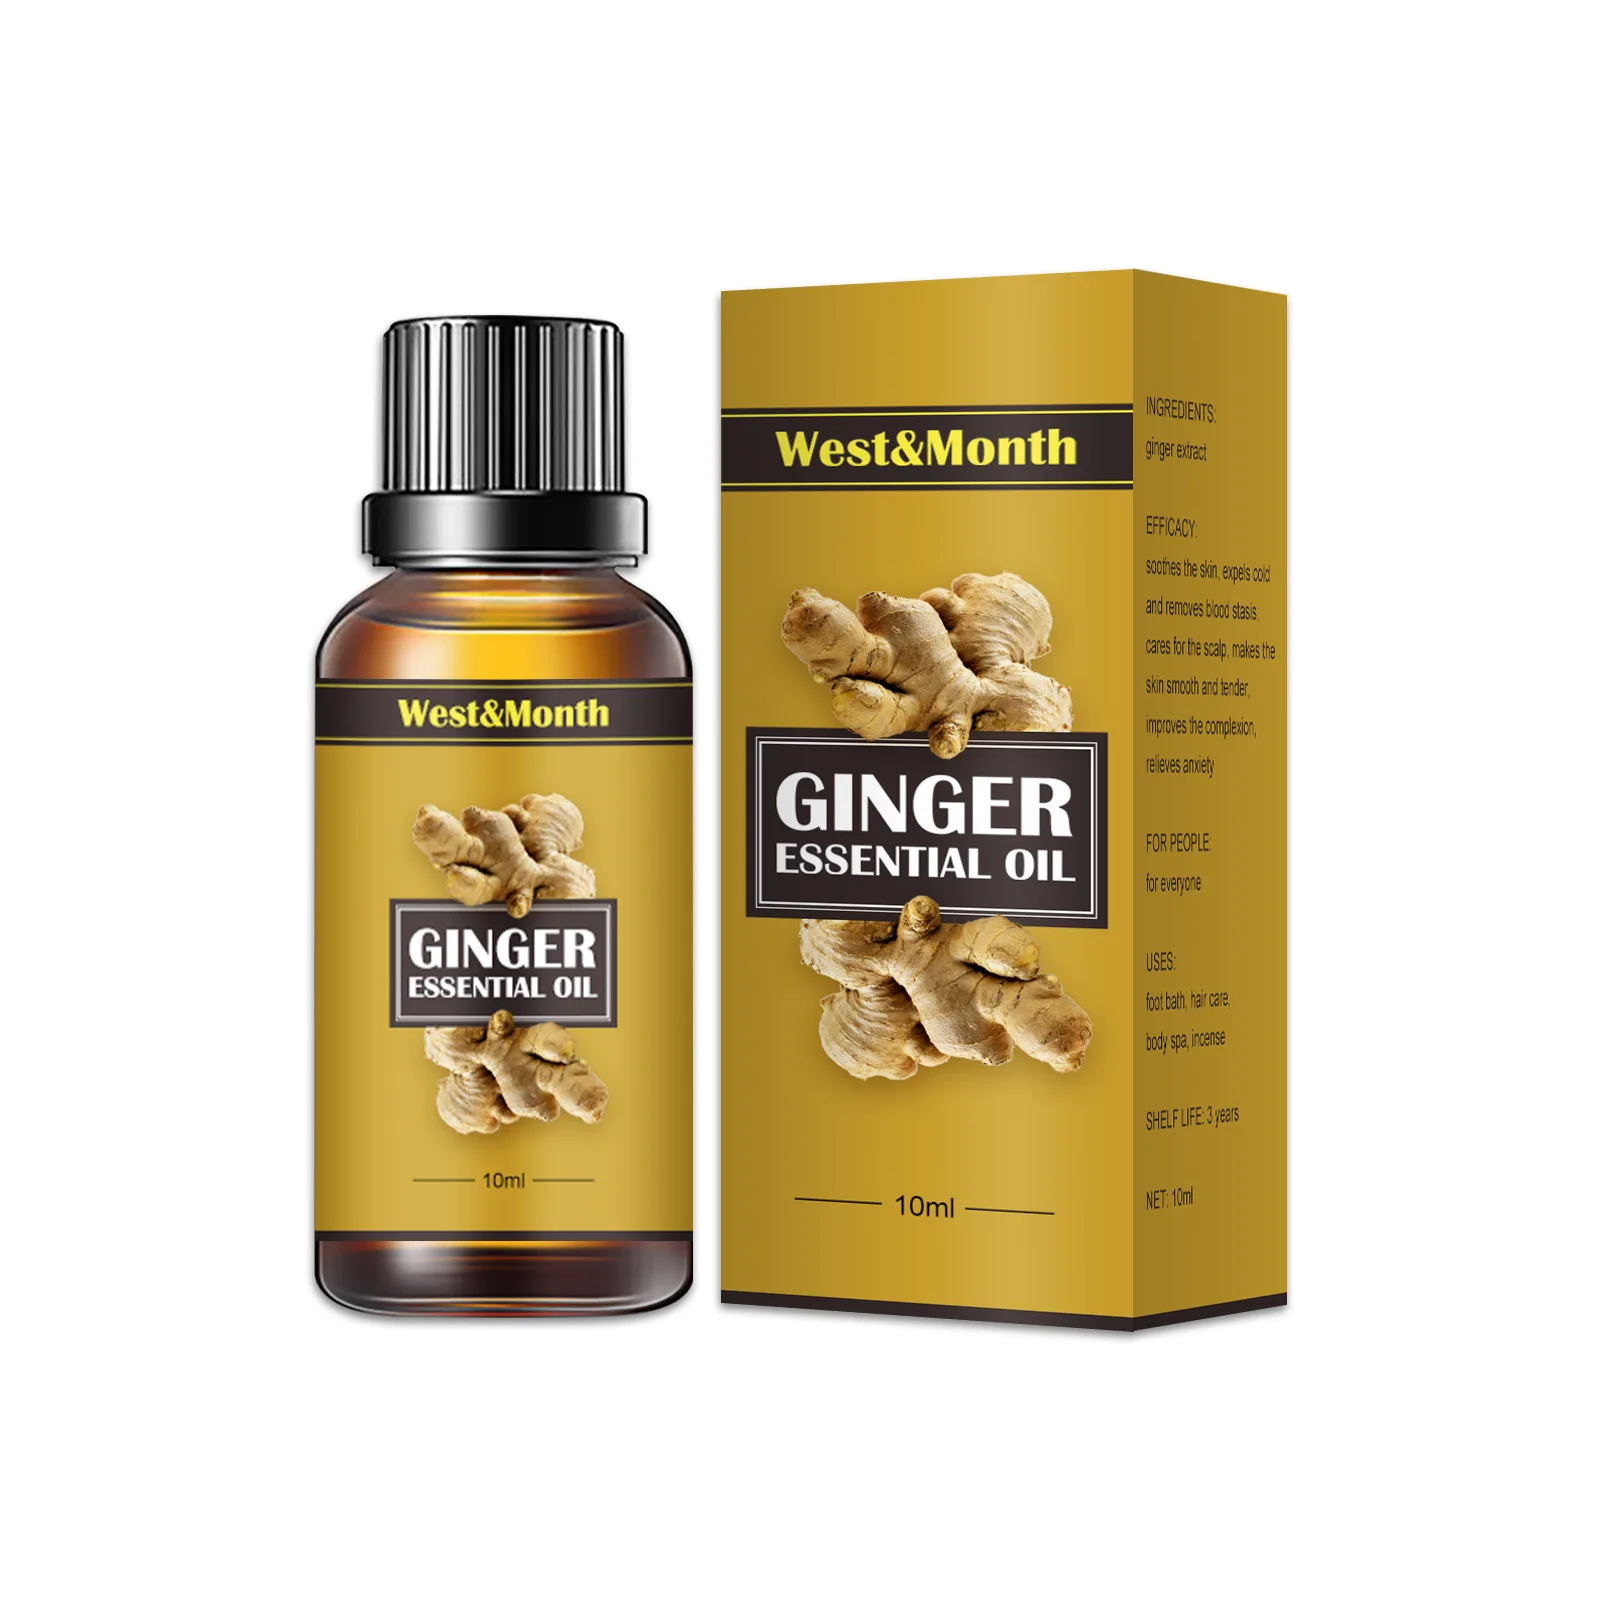 

West&Month Natural Ginger Oil Lymphatic Drainage Therapy Anti Aging Plant Essential Oil Promote Metabolism Full Body Slim Oils